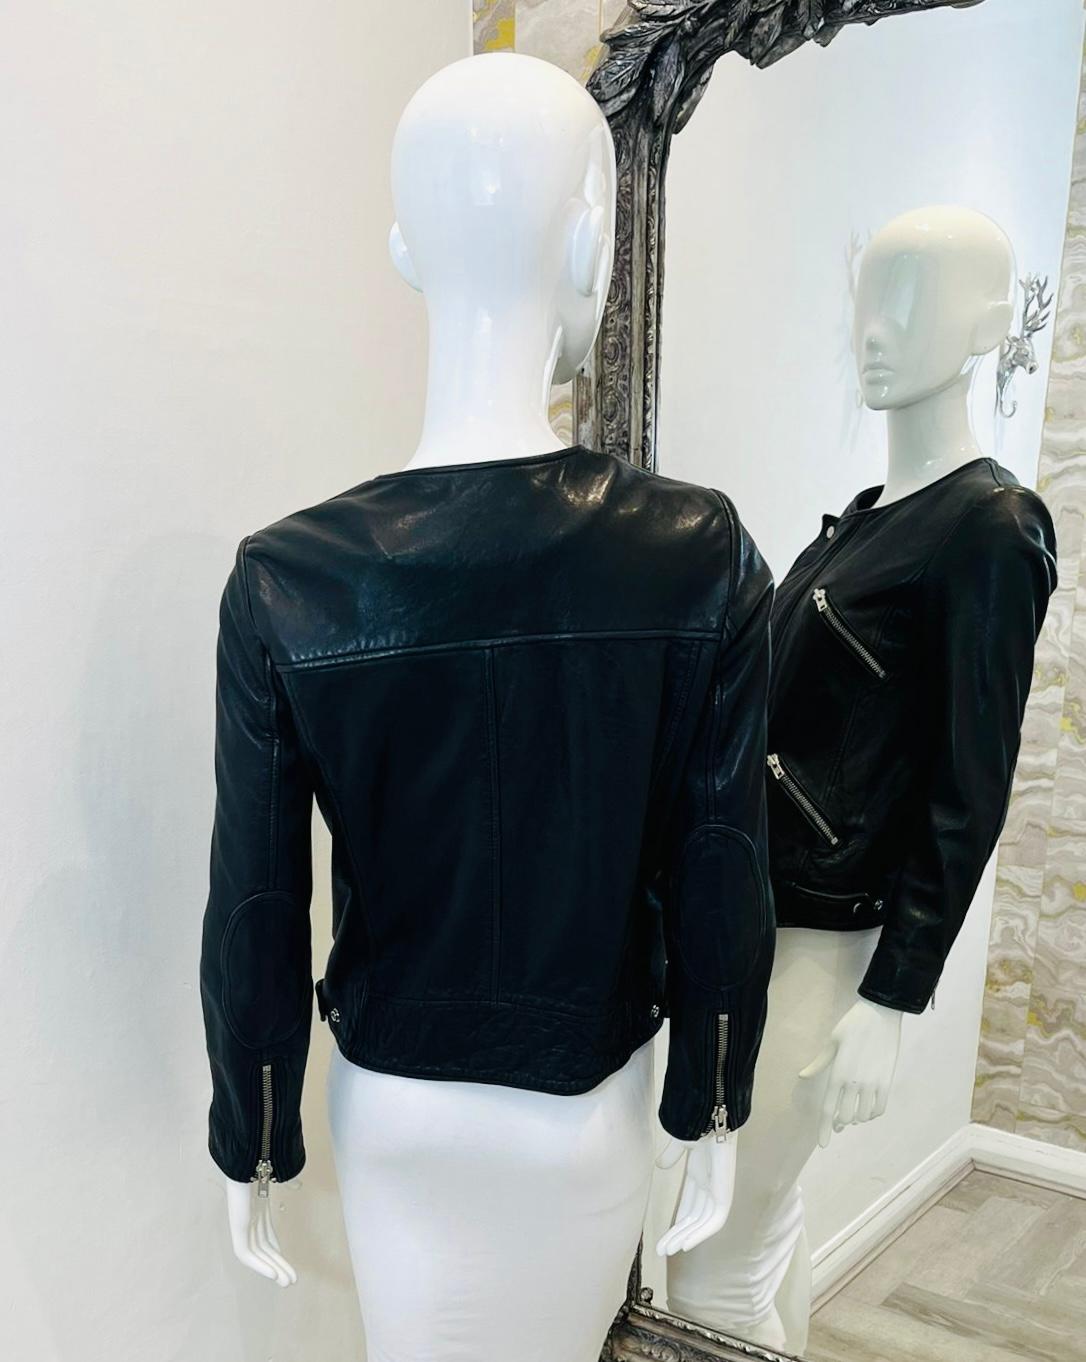 Isabel Marant Etoile Lambskin Biker Jacket In Excellent Condition For Sale In London, GB